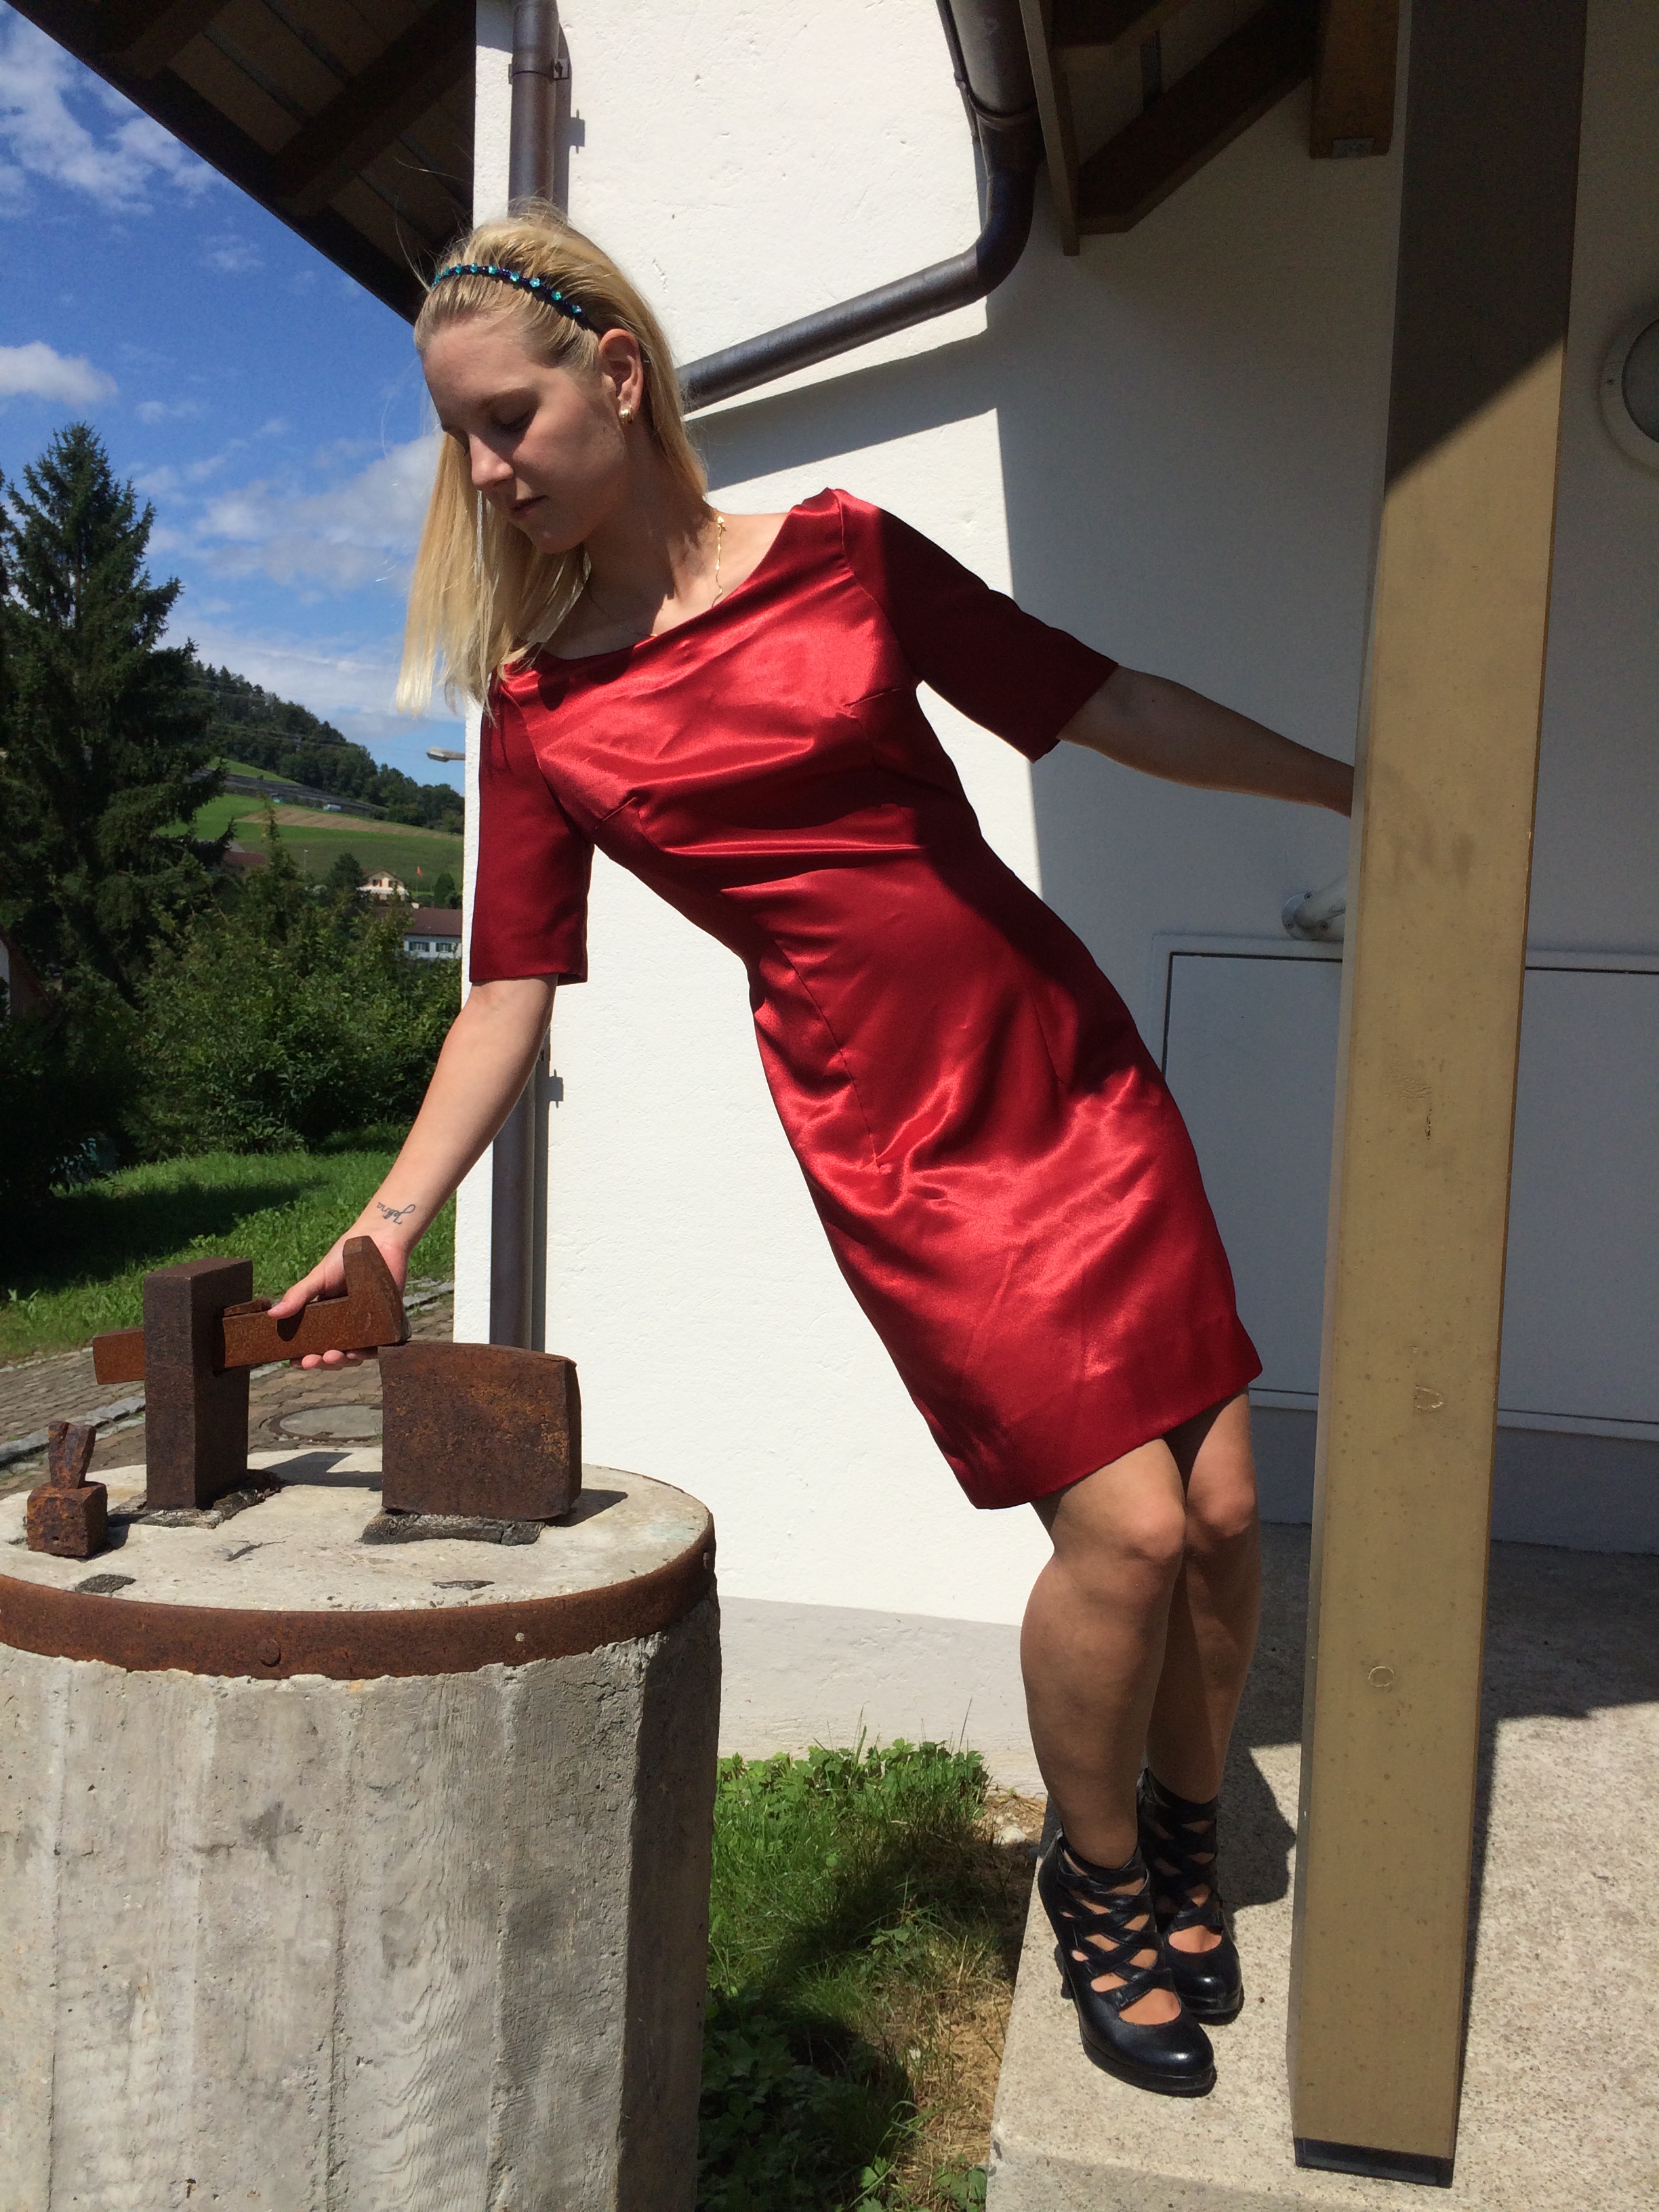 Silky red dress playing with hammer